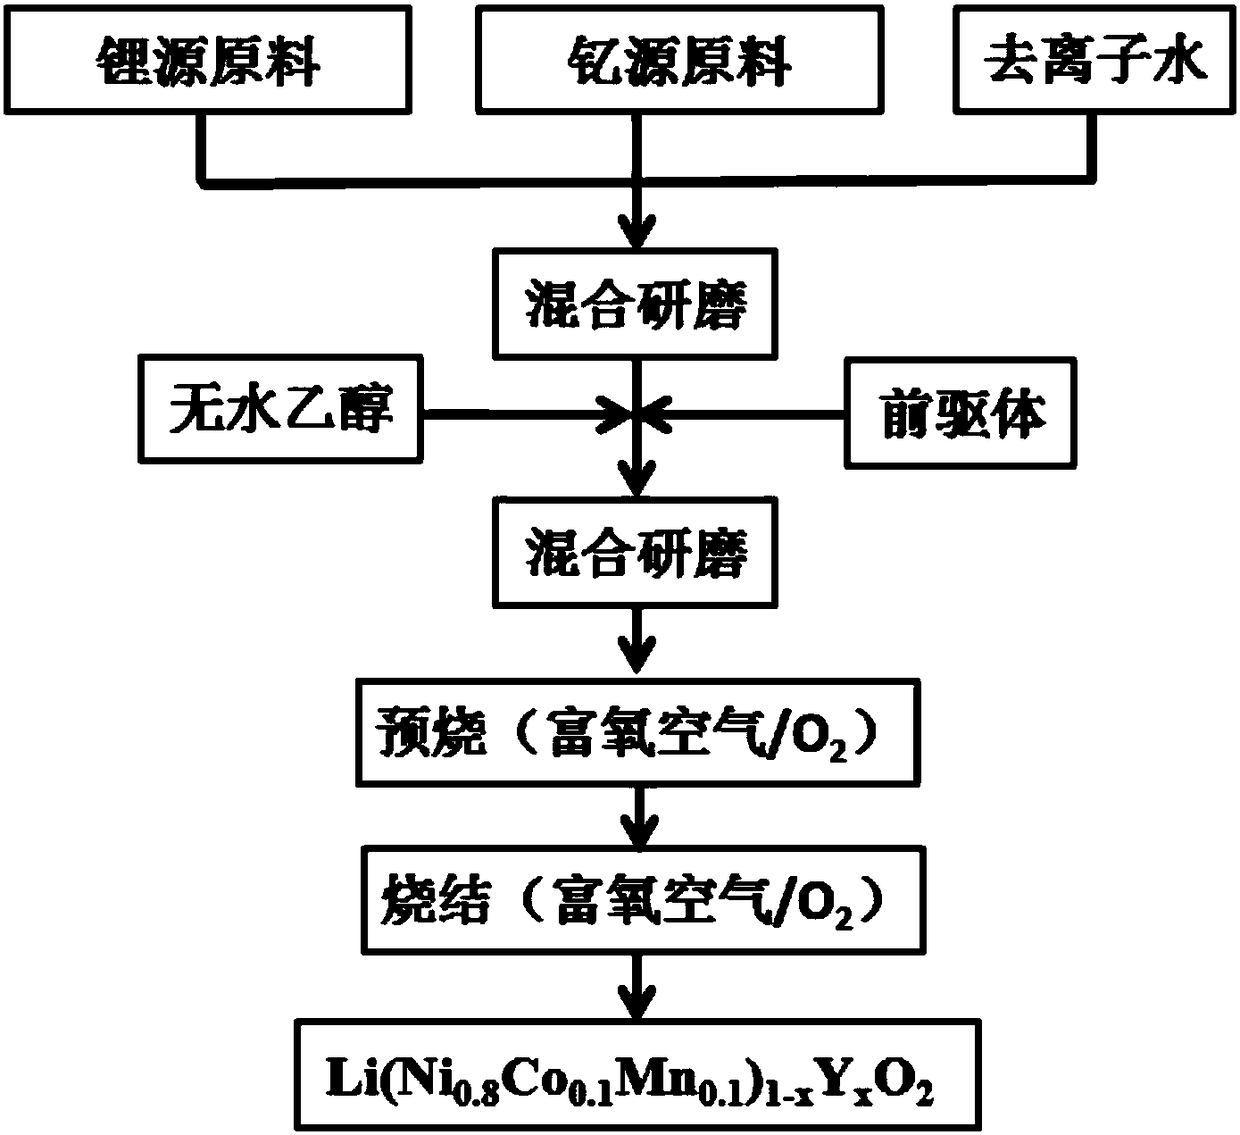 Lithium ion battery anode material Li(Ni0.8Co0.1Mn0.1)1-xYxO2 and preparation method